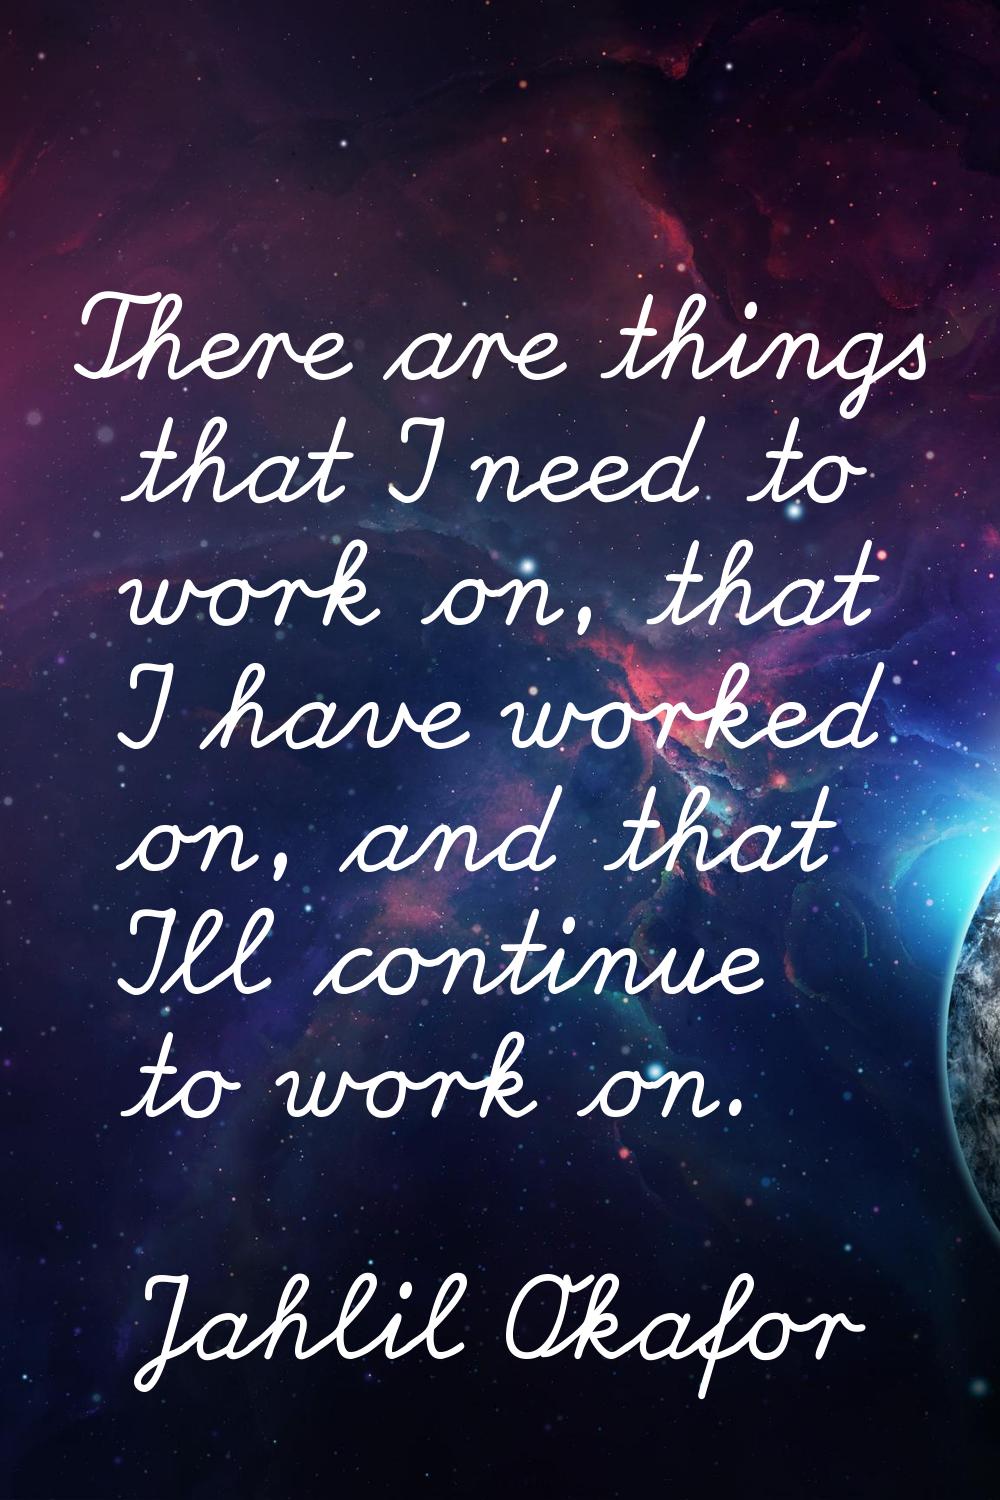 There are things that I need to work on, that I have worked on, and that I'll continue to work on.